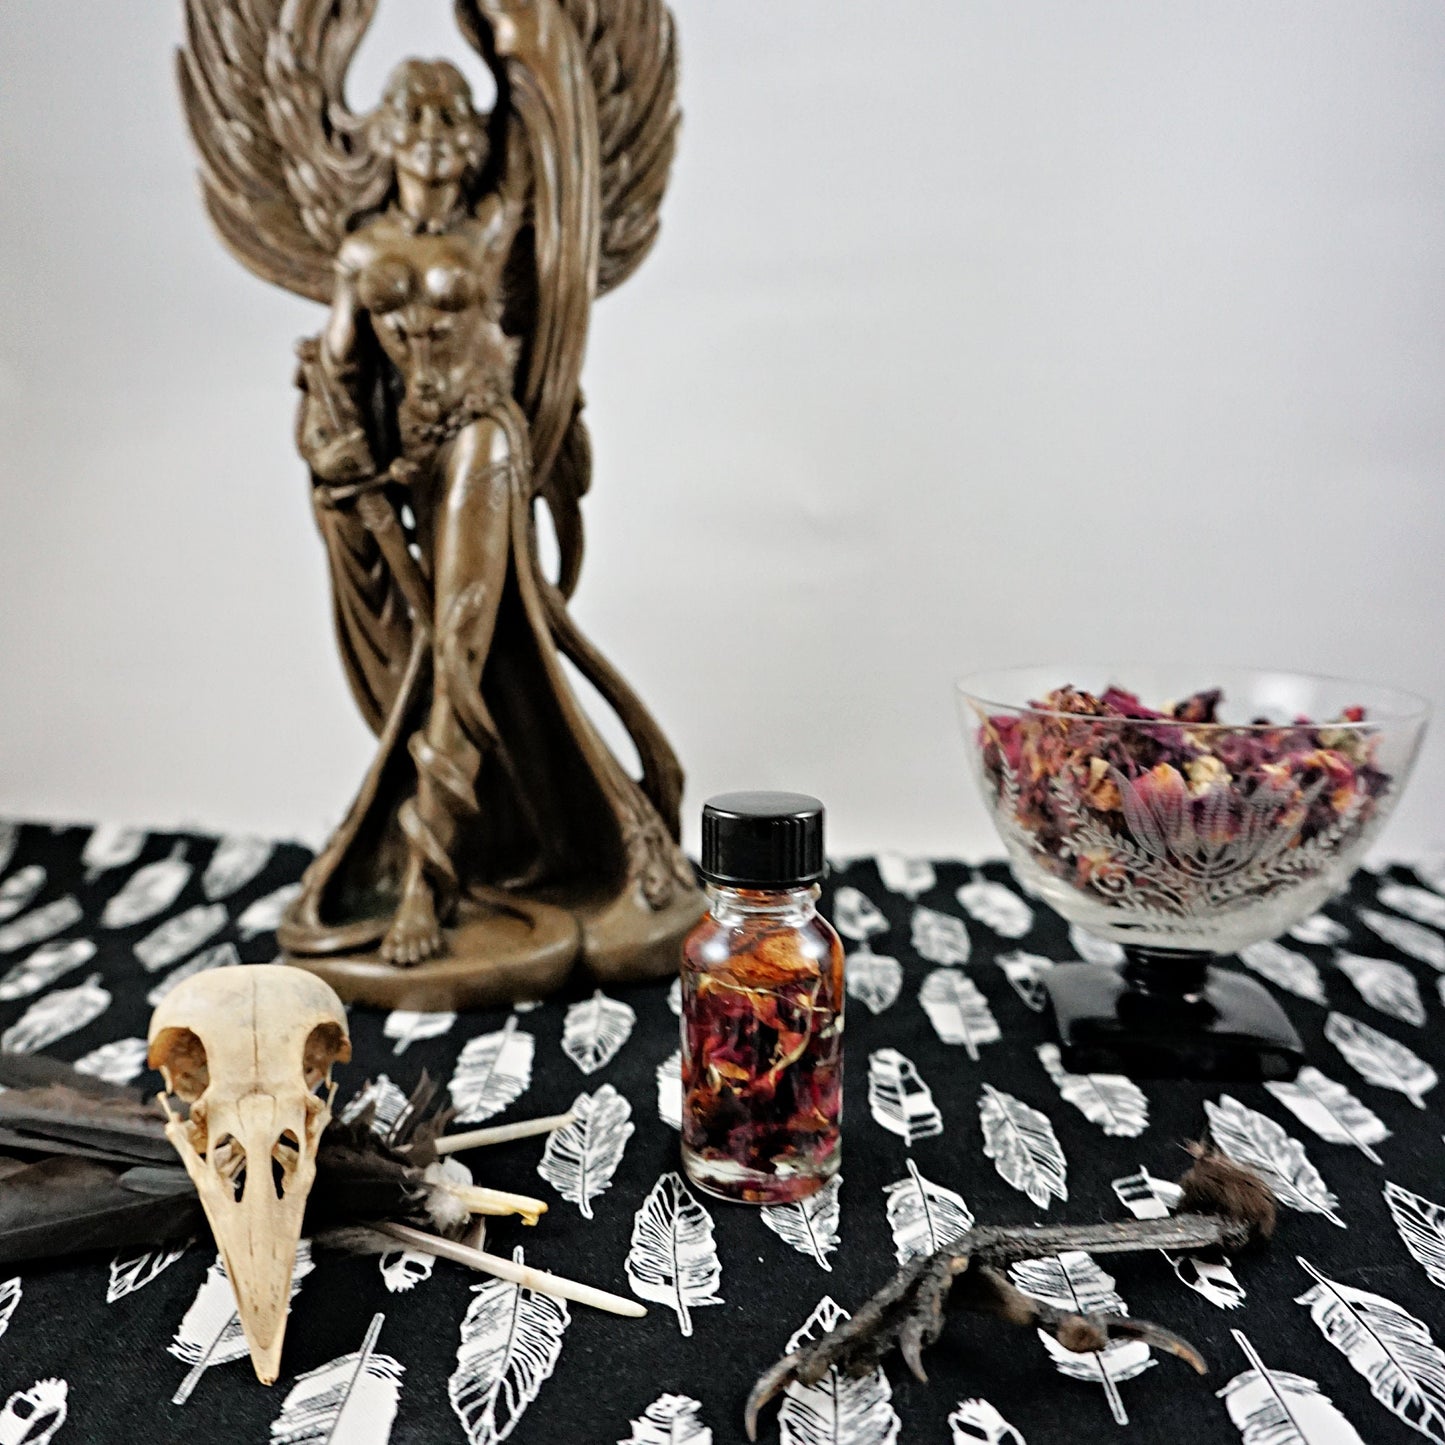 THE MORRIGAN Ritual Oil, Invocation, Spell, Dark Goddess Offering, Power, Strength, Prophecy